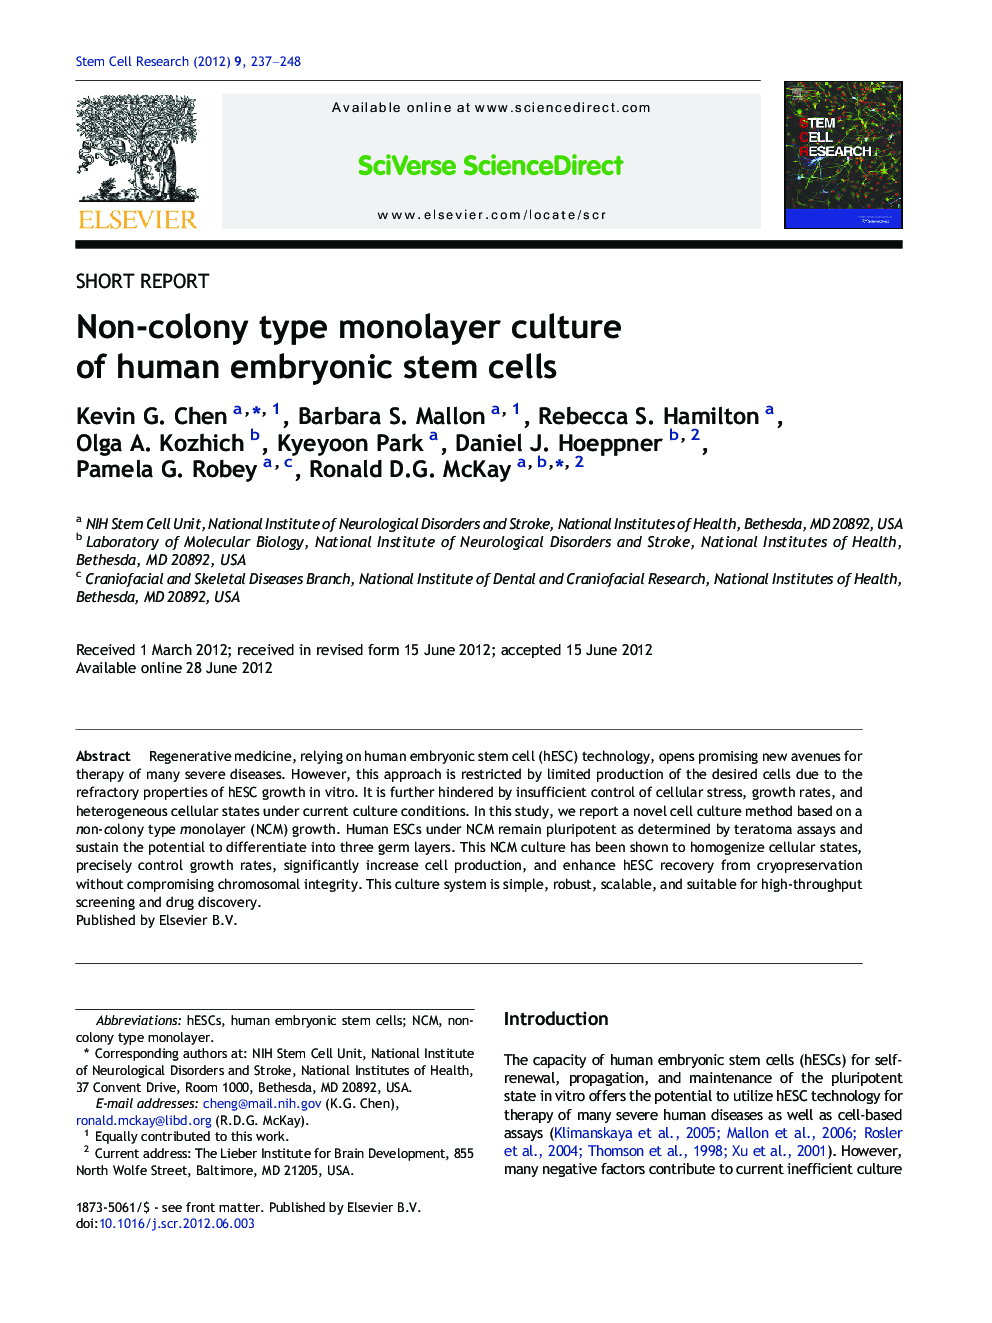 Non-colony type monolayer culture of human embryonic stem cells